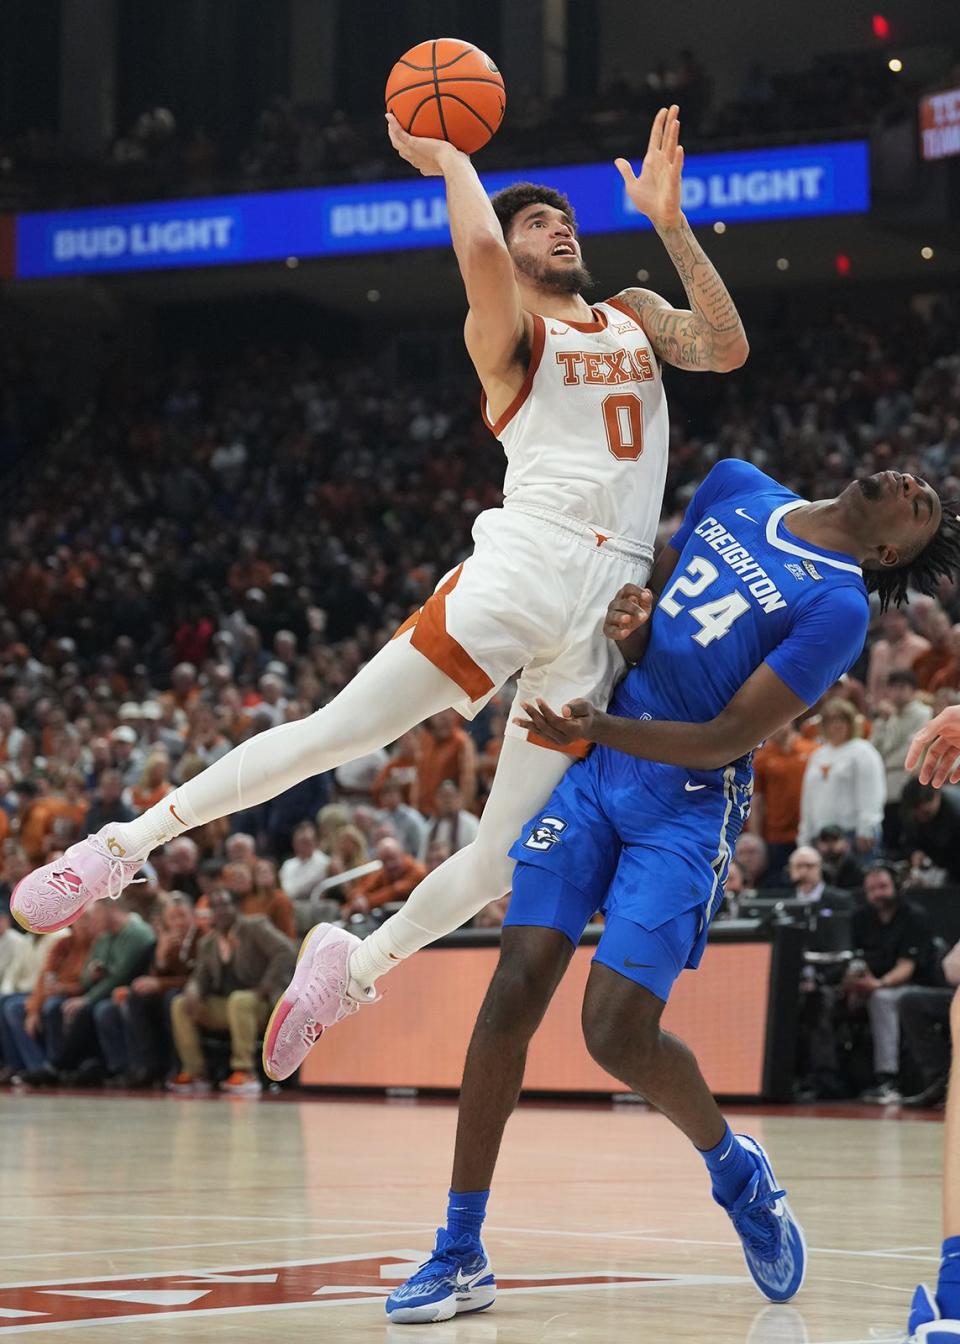 Texas forward Timmy Allen shoots over Creighton forward Arthur Kaluma during Thursday night's win at Moody Center. No. 2 Texas is 6-0 heading into its next game against No. 16 Illinois in the Jimmy V Classic next Tuesday.